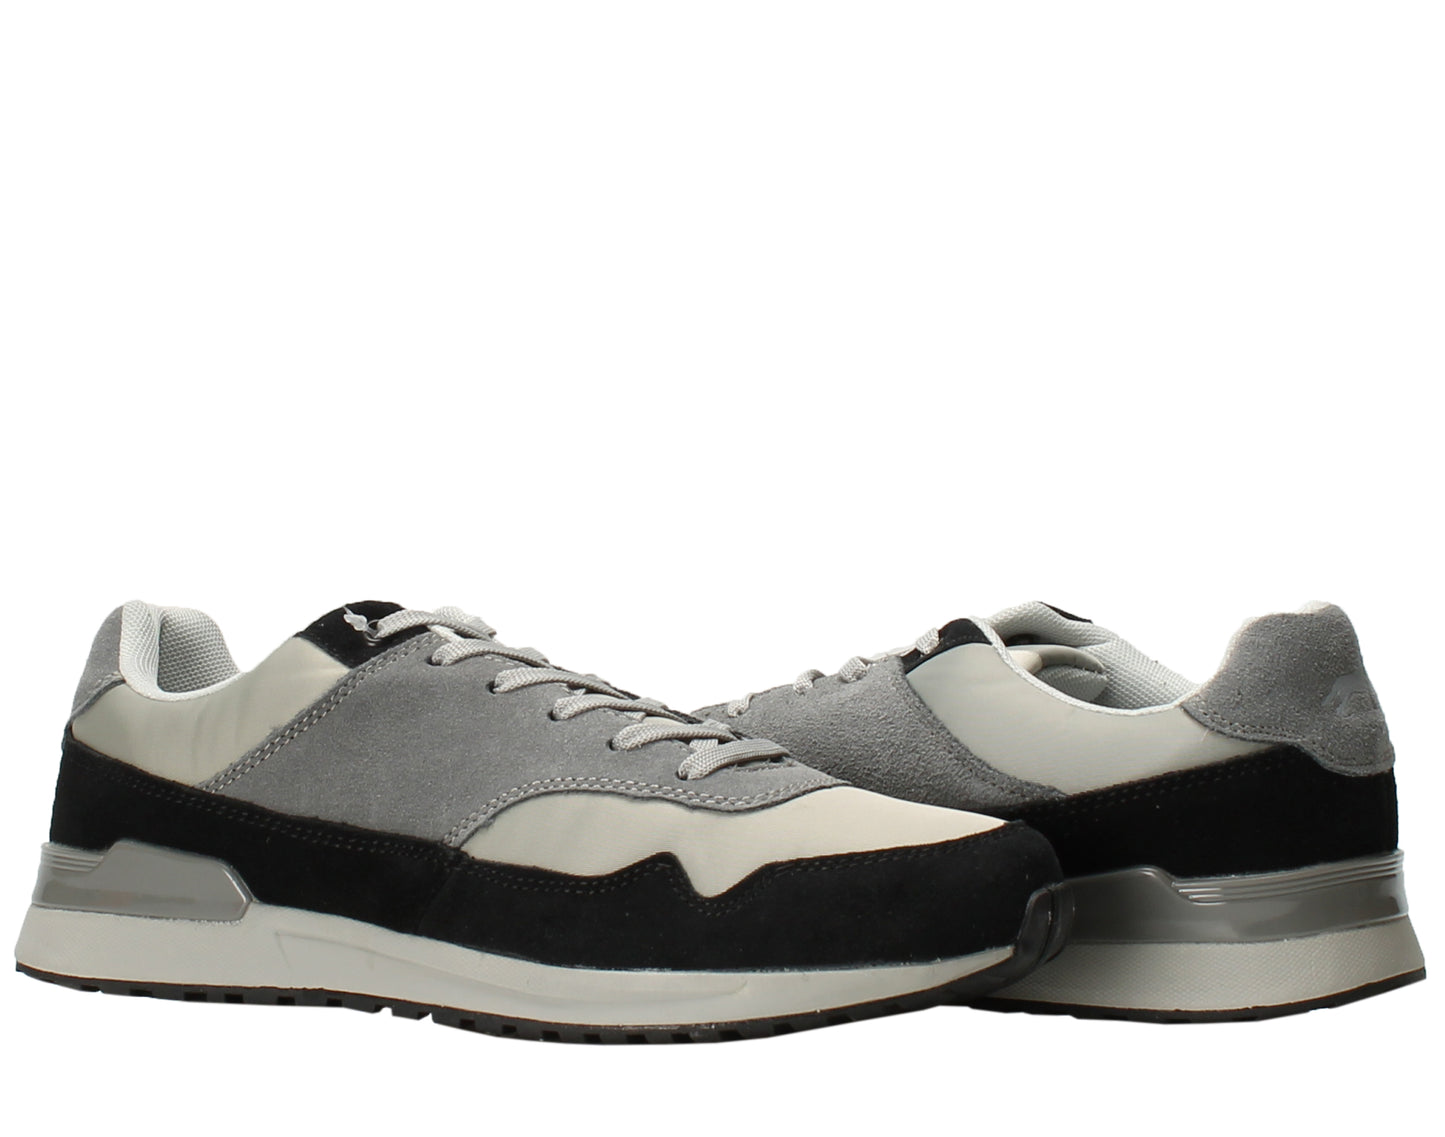 Howling Wolf Ranaway Men's Running Shoes